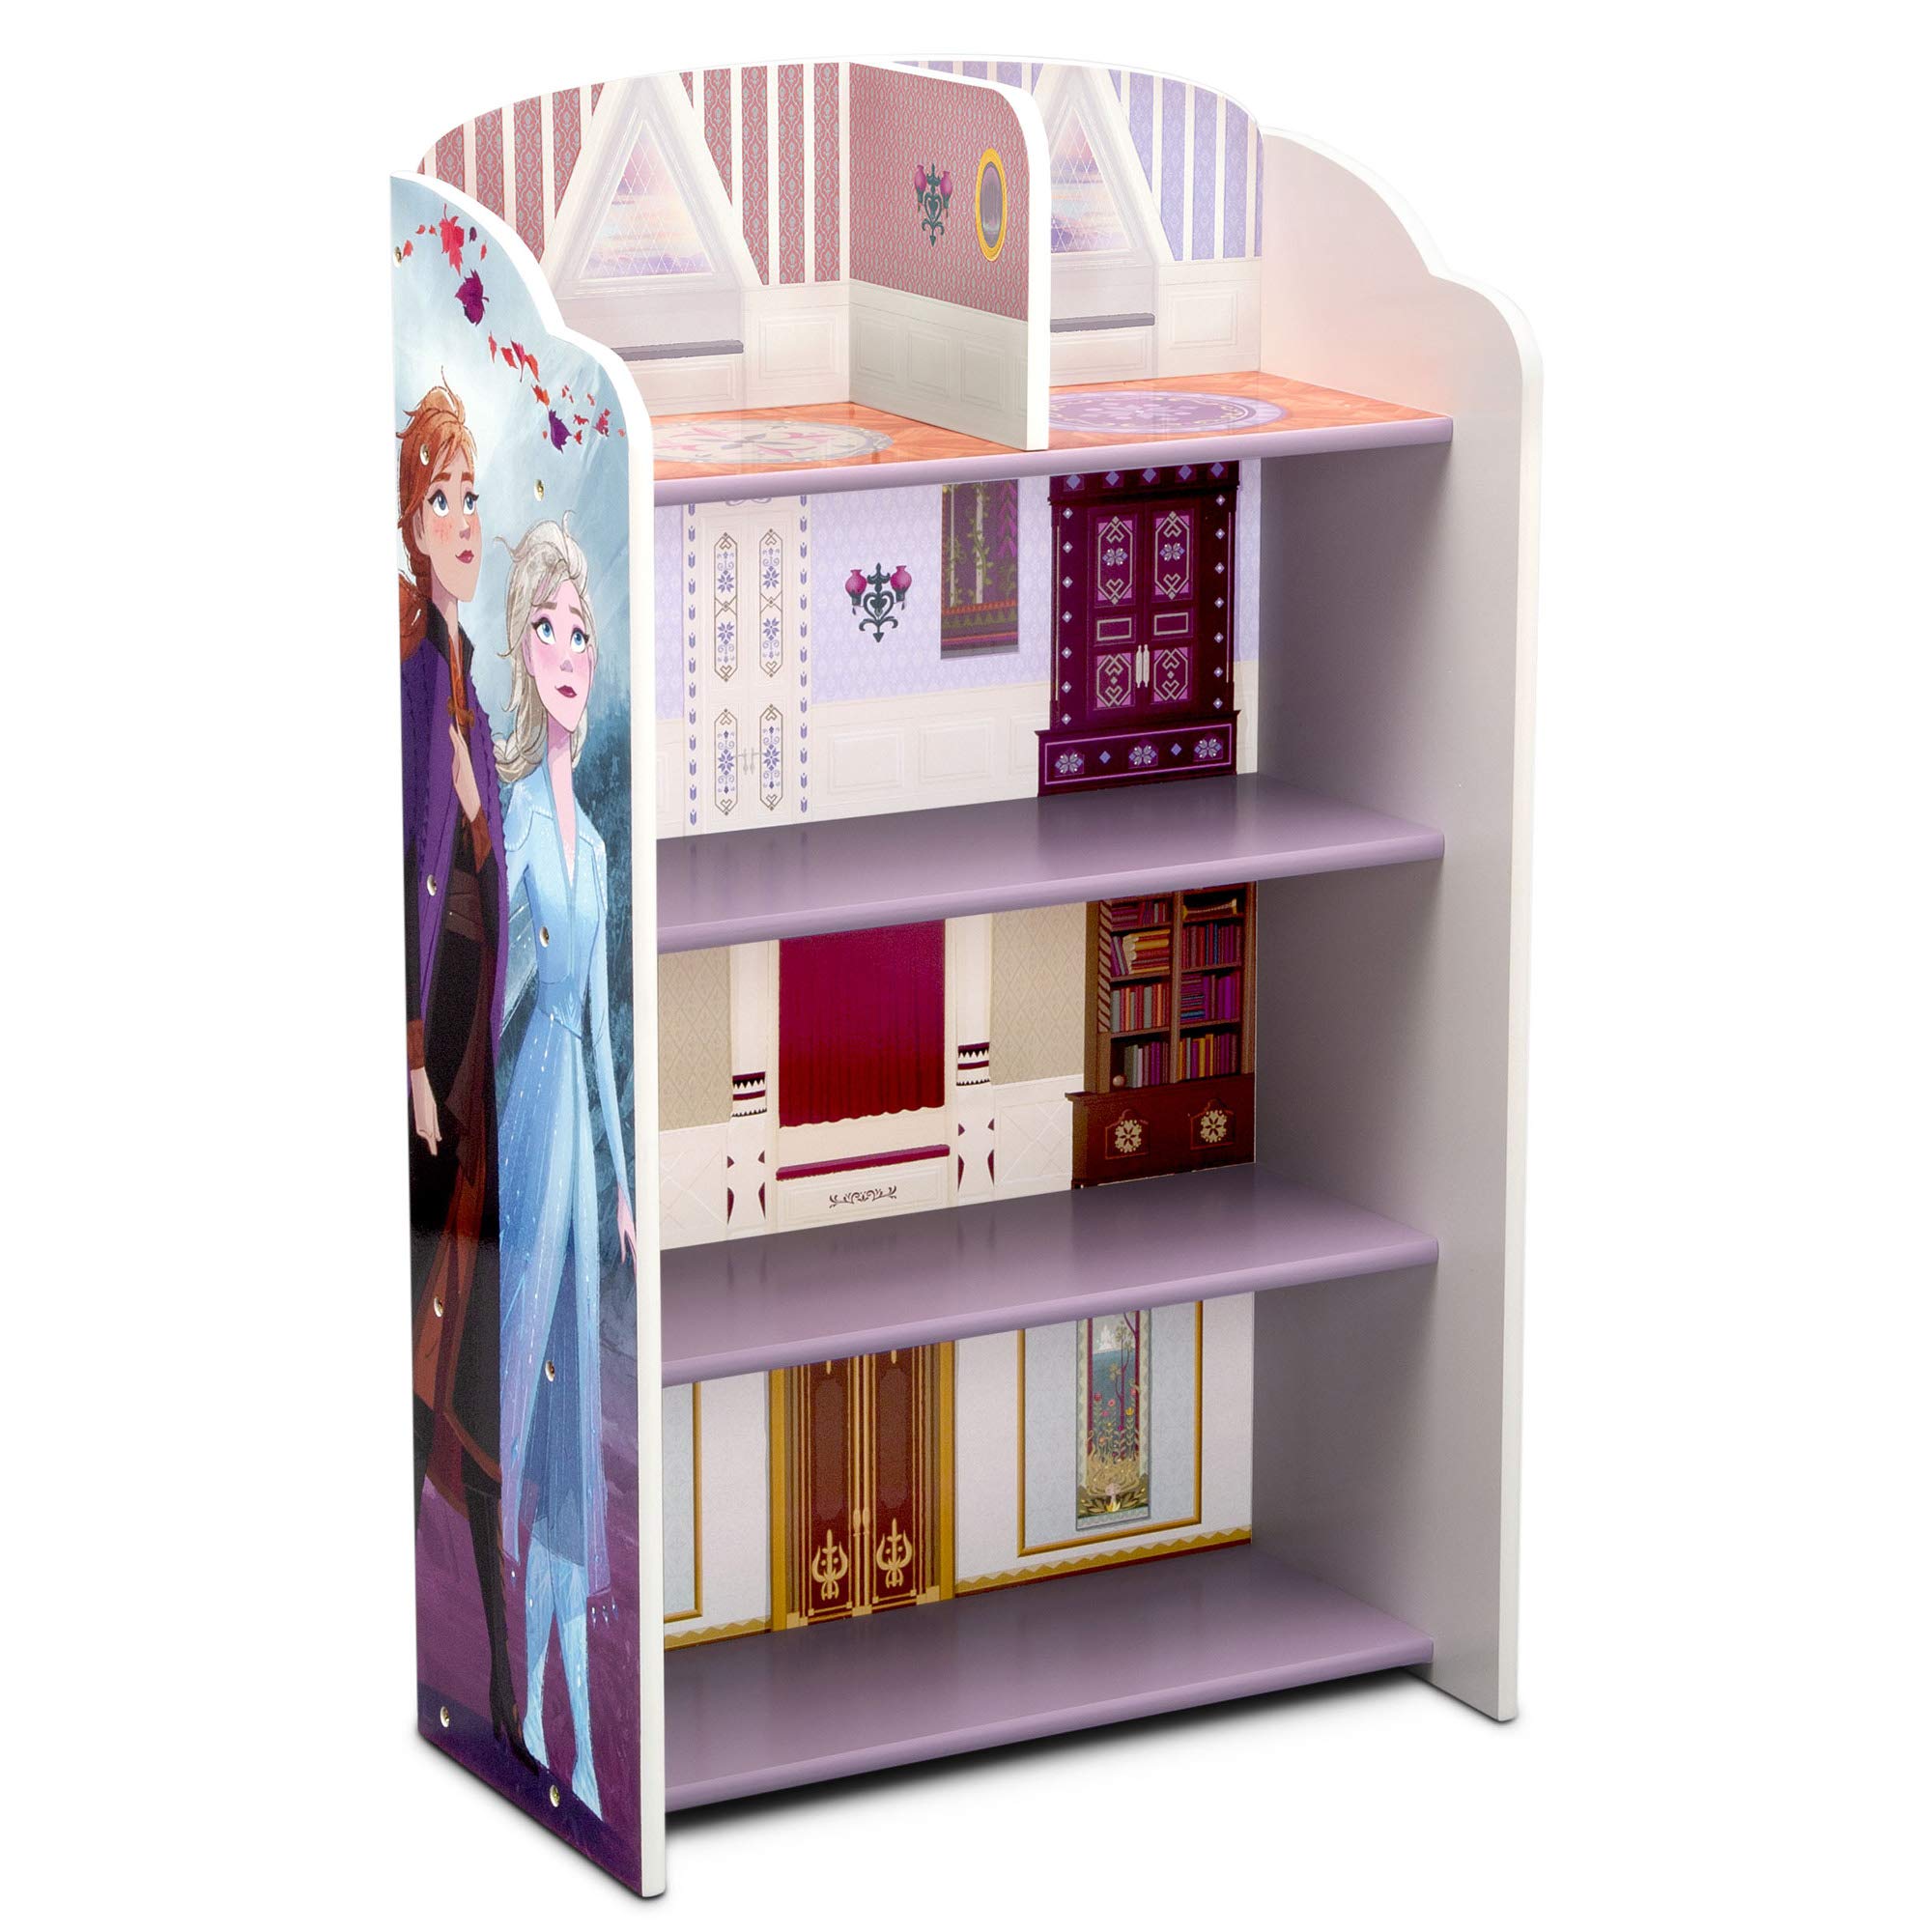 4-Shelf Delta Kids Wooden Playhouse / Bookcase (Frozen II) $30 + Free Shipping w/ Prime or on $35+